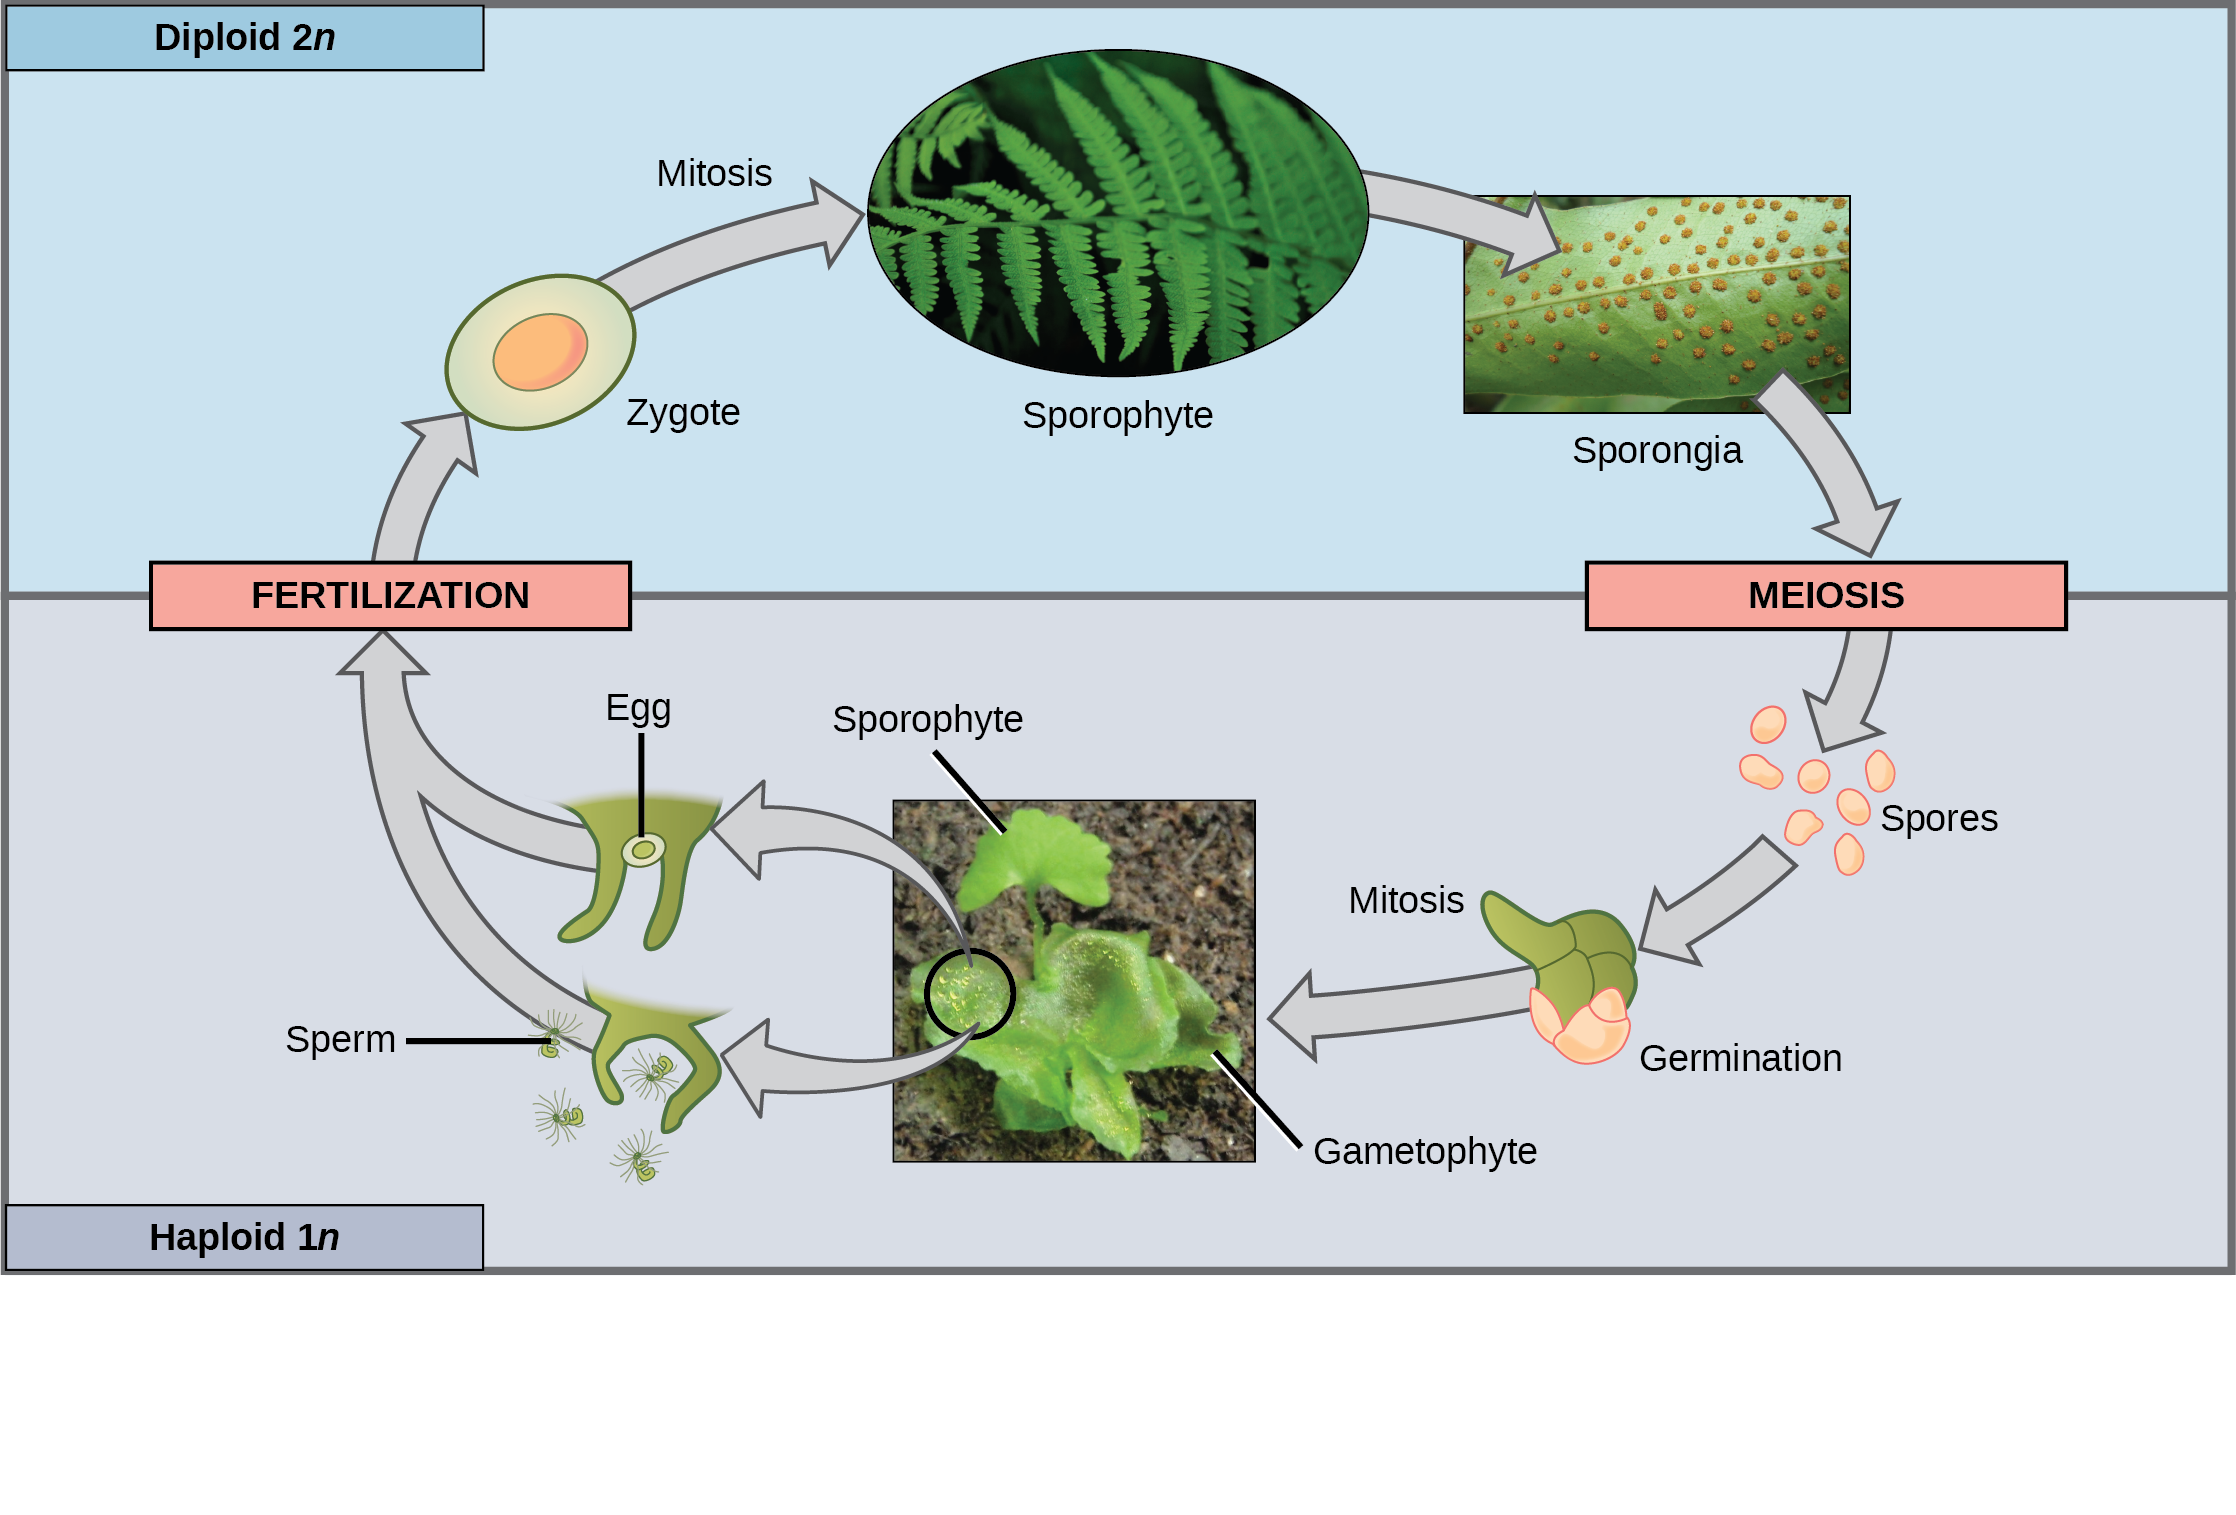 This illustration shows the life cycle of fern plants. The diploid (2n) zygote undergoes mitosis to produce the sphorophyte, which is the familiar, leafy plant. Sporangia form on the underside of the leaves of the sphorophyte. Sporangia undergo meiosis to form haploid (1n) spores. The spores germinate and undergo mitosis to form a multicellular, leafy gametophyte. The gametophyte produces eggs and sperm. Upon fertilization, the egg and sperm form a diploid zygote.